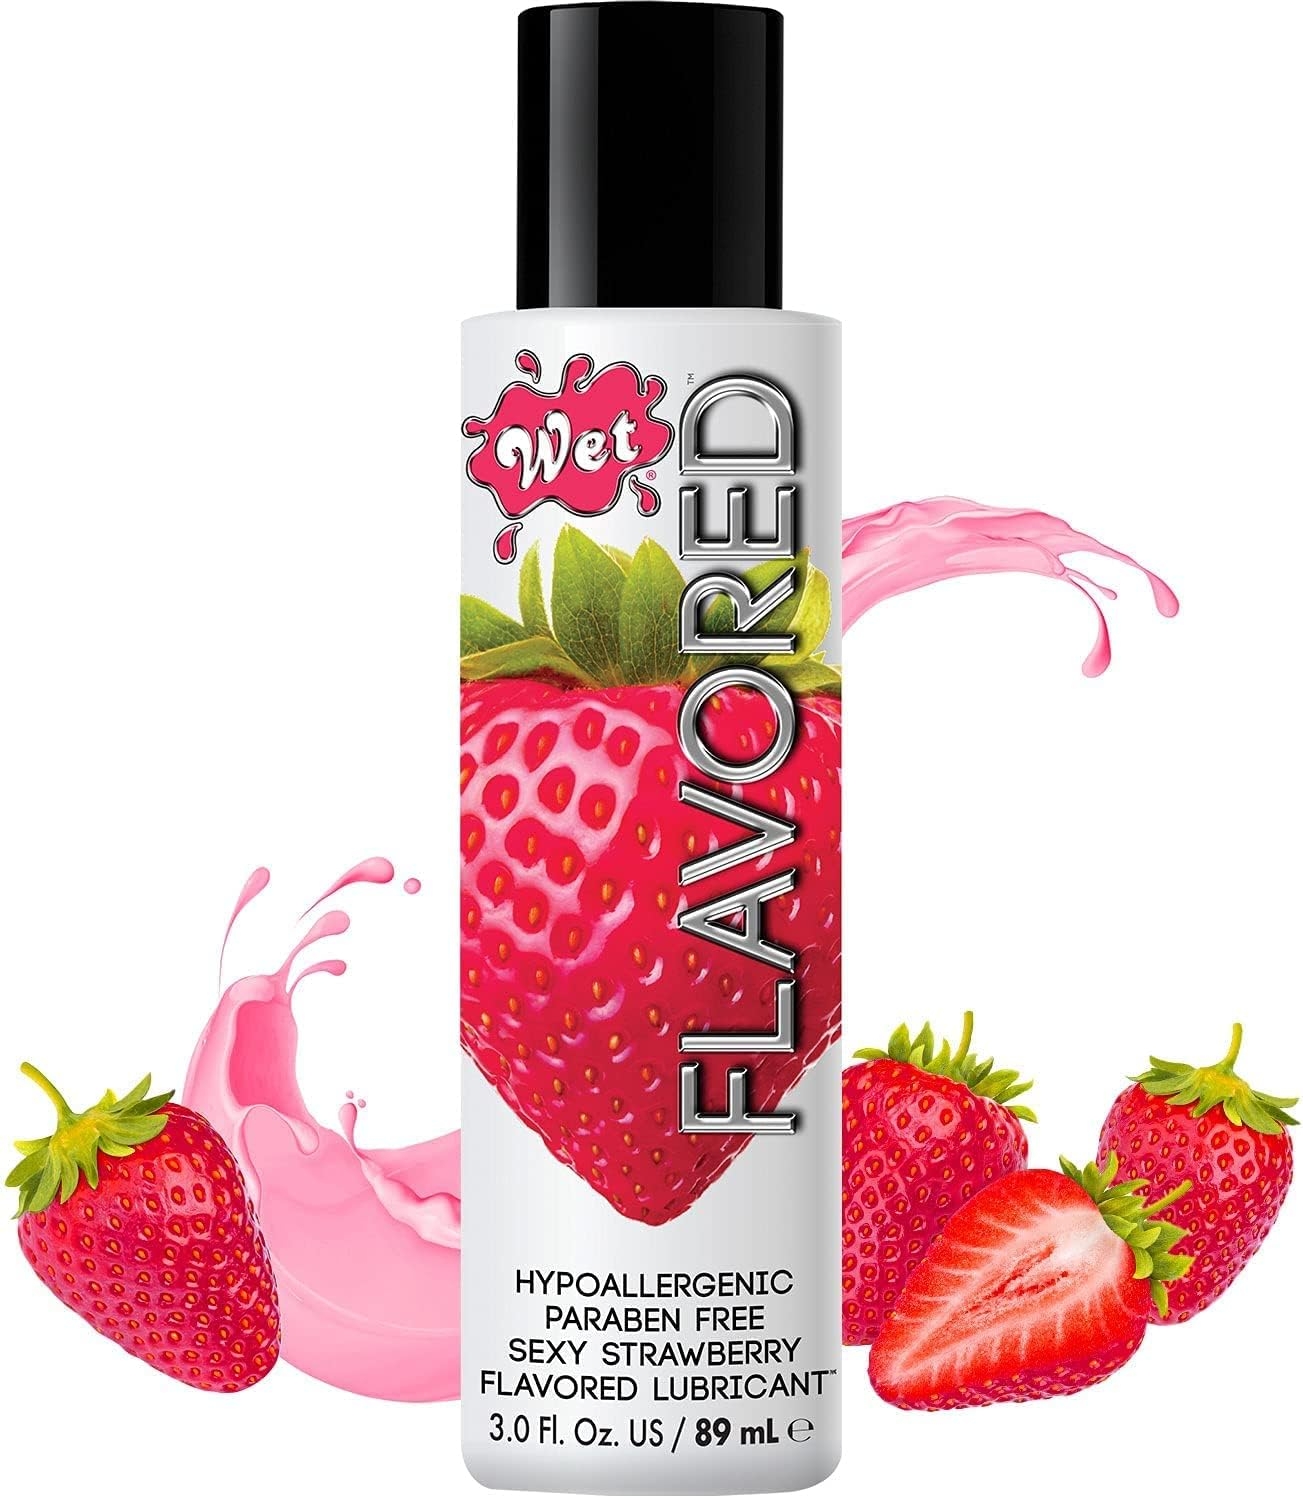 Wet Flavored Sultry Strawberry Edible Lube, Premium Personal Lubricant, 3 Ounce, for Men, Women and Couples, Ideal for Foreplay, Paraben Free, Gluten Free, Stain Free, Sugar Free, Hypoallergenic